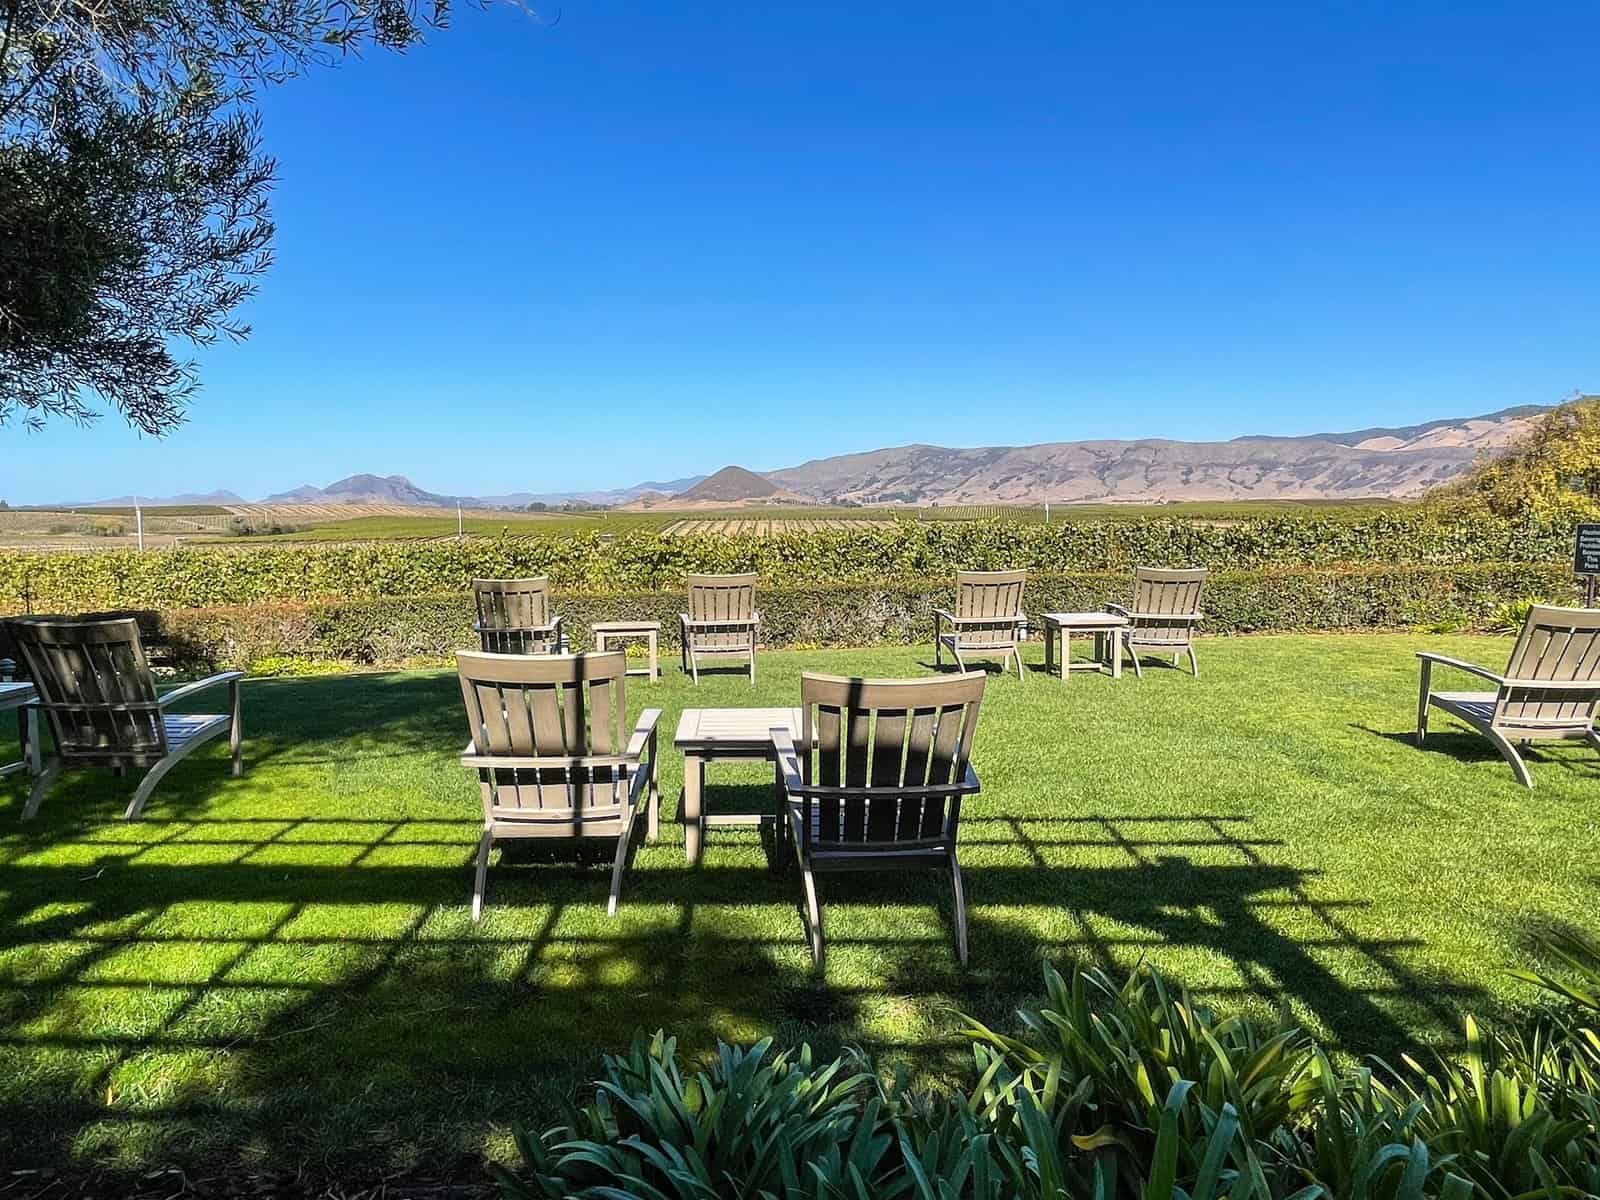 Chairs on the grass at a winery in San Luis Obispo and Edna Valley beyond.